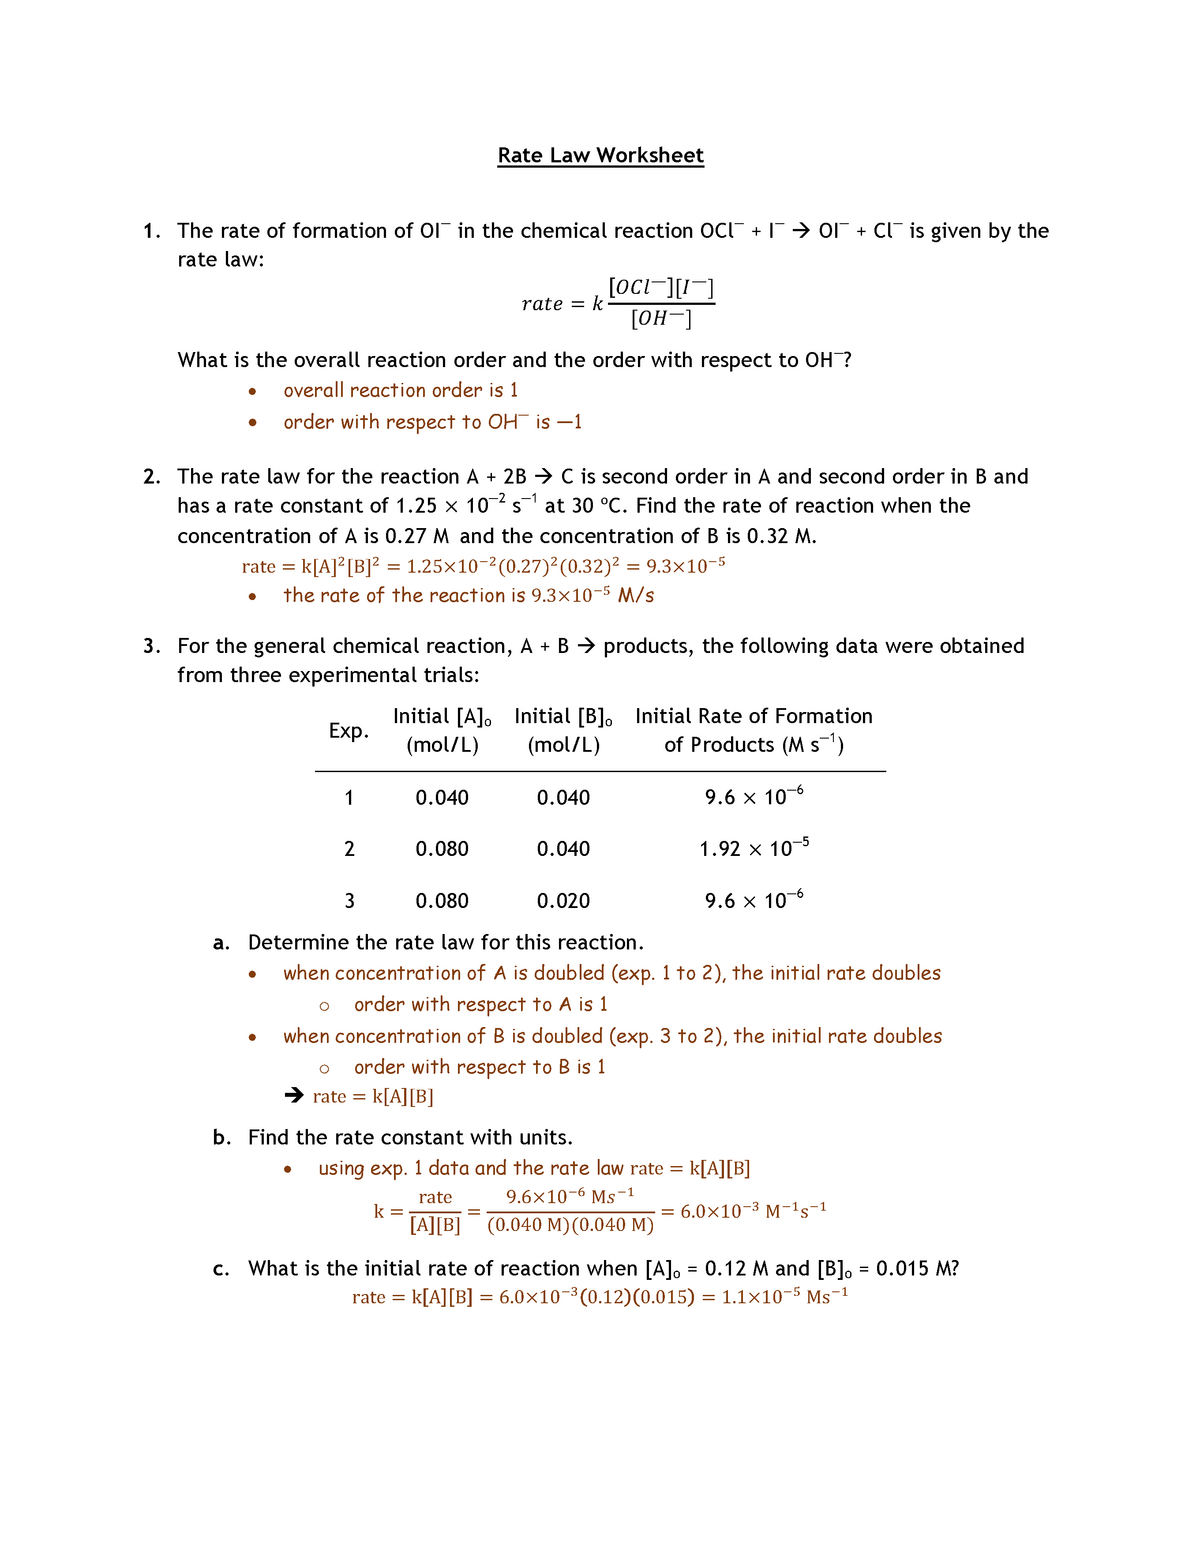 Rate Law Worksheet Answers Rate Law Worksheet 1 The rate of